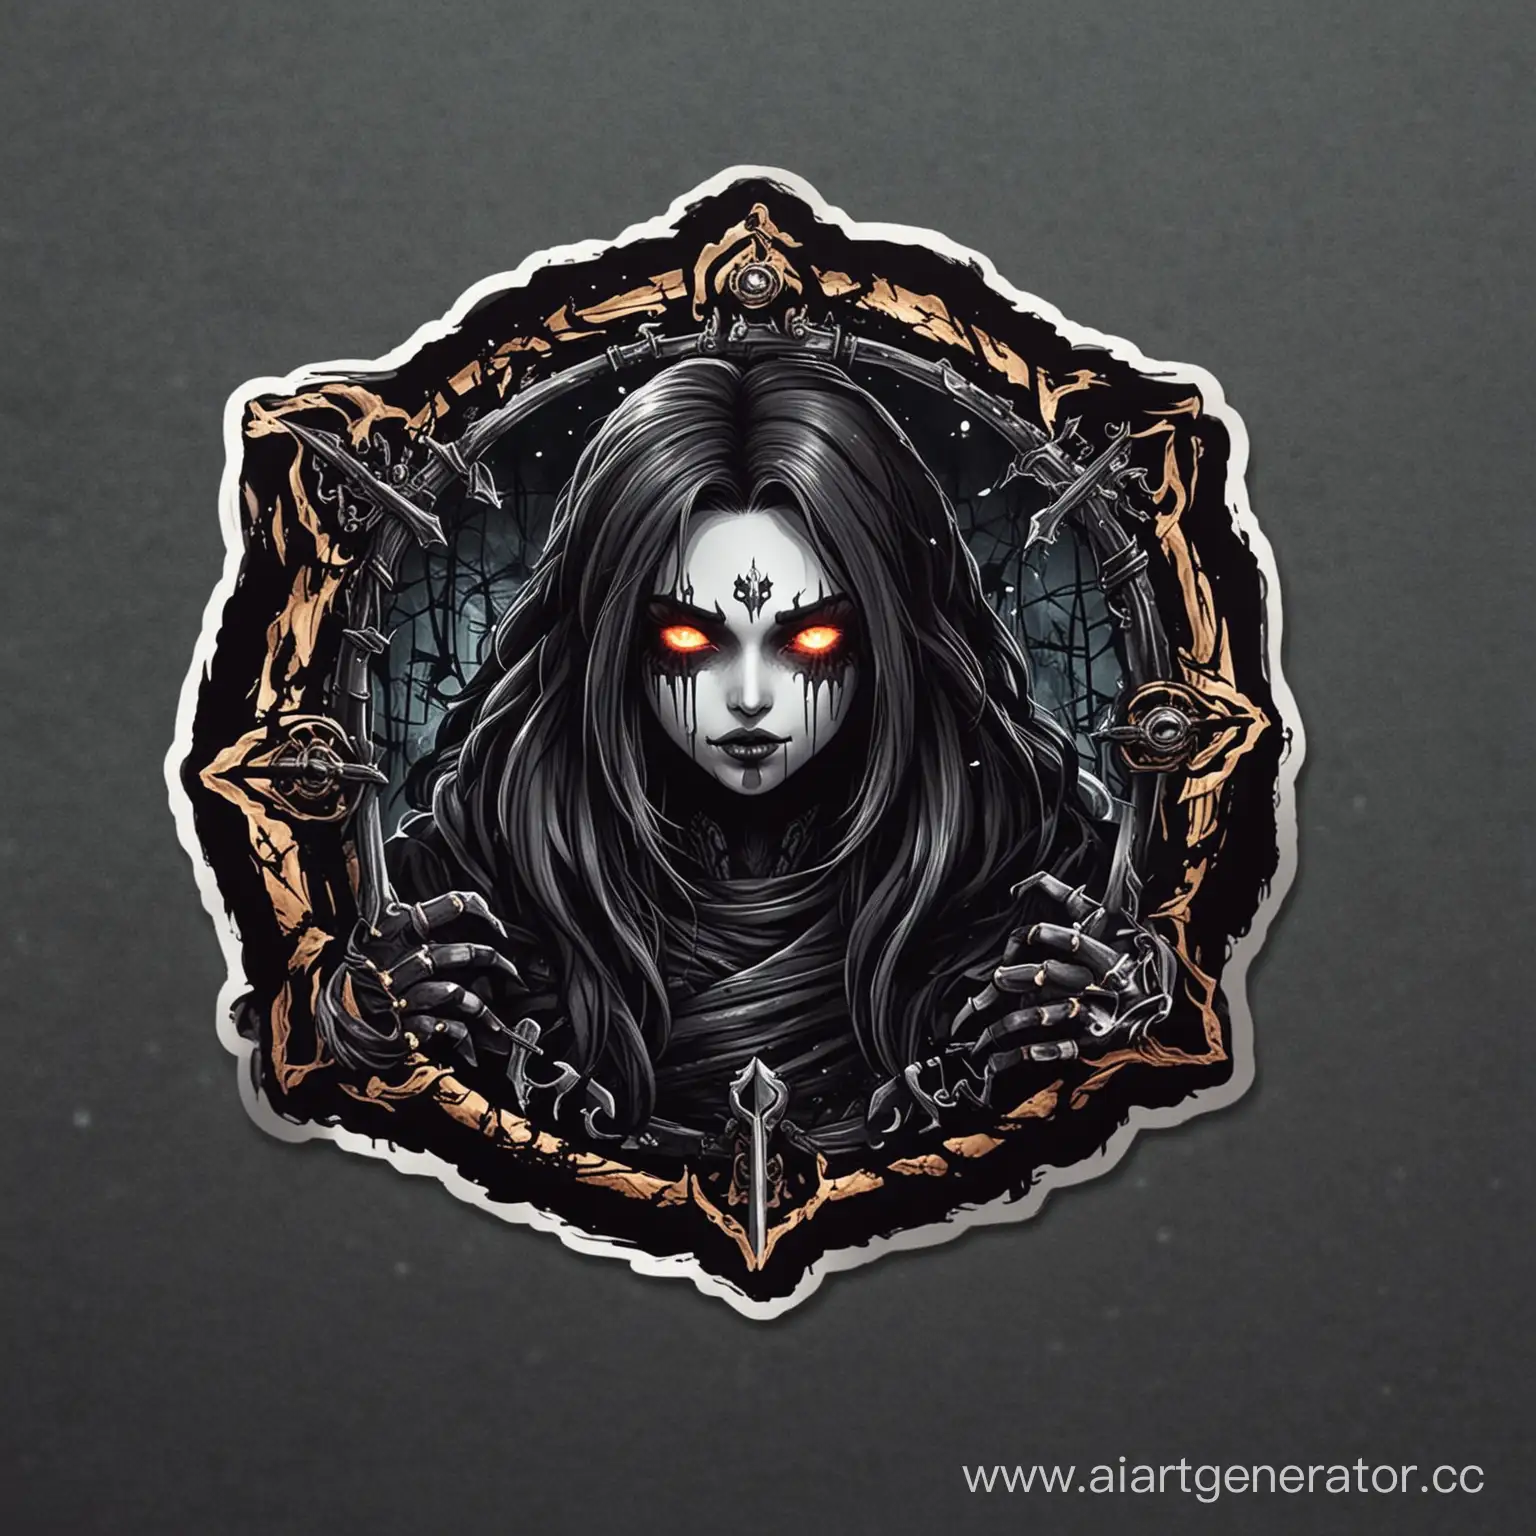 sticker for a social network about dark fantasy